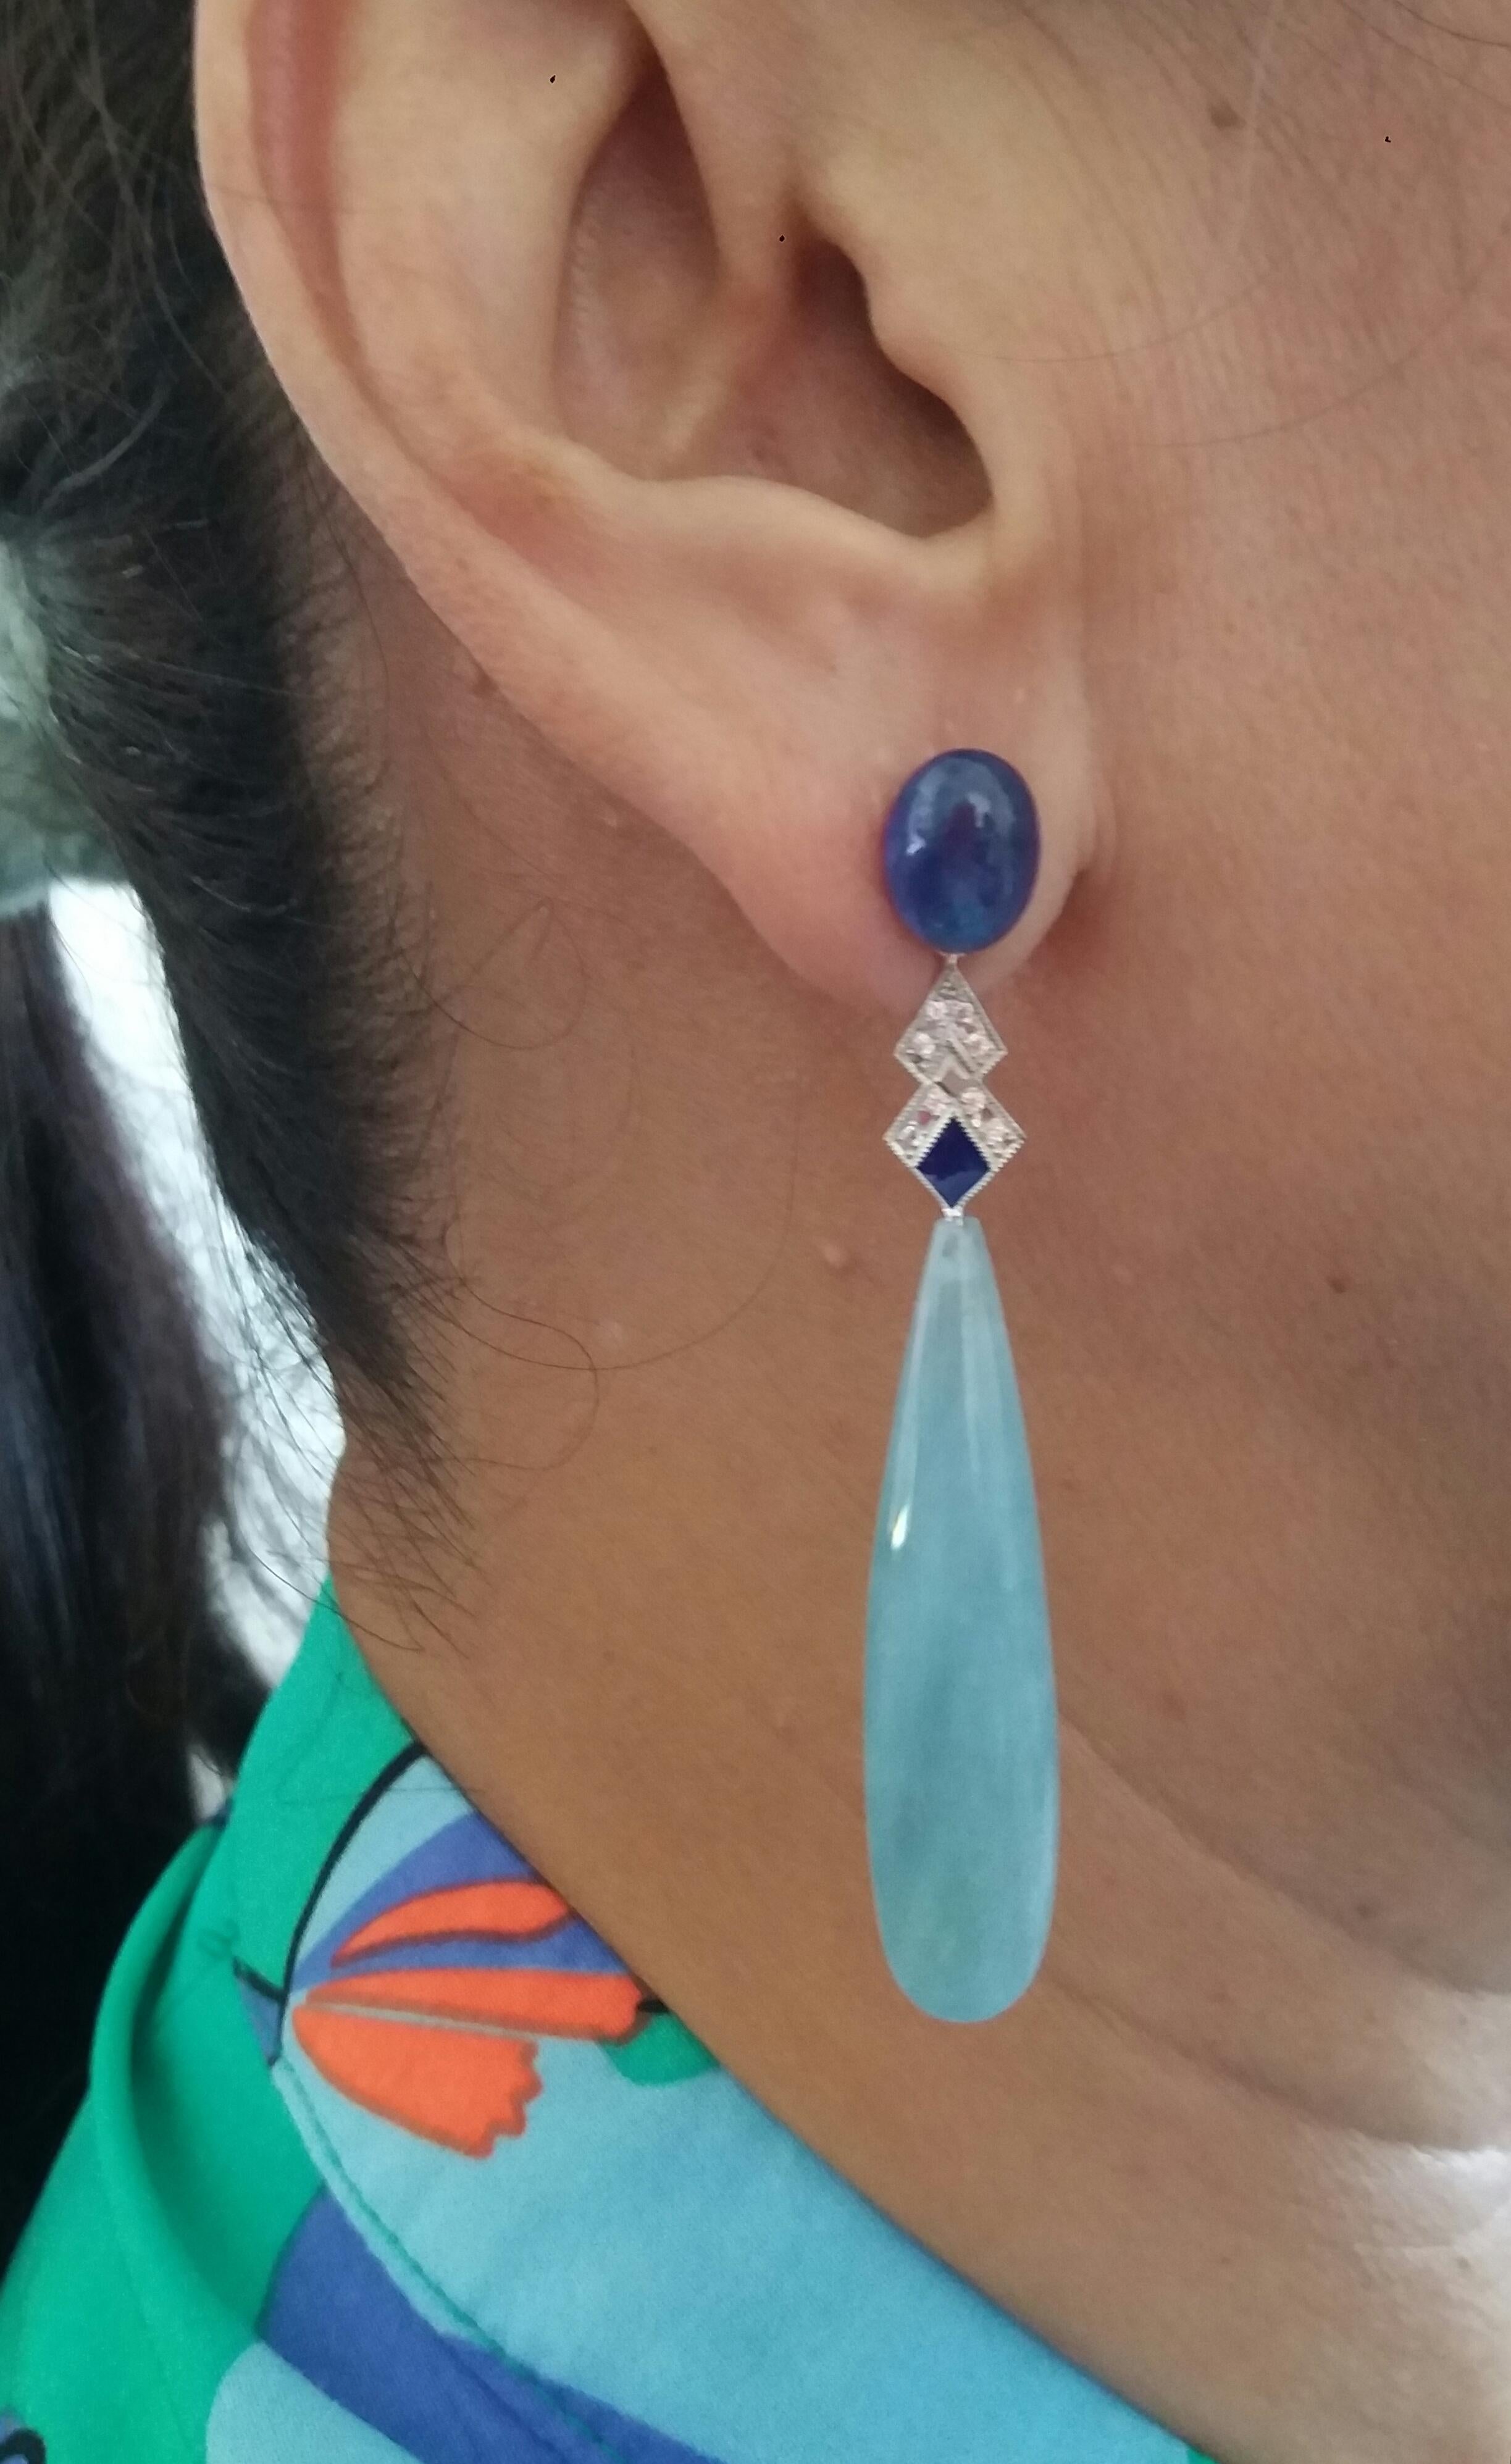 In these Classic Art Deco style earrings we have 2 very good quality Natural Thai Blue Sapphire cabochons measuring 7,5 x 10 mm. as  tops, middle parts are in white gold ,16 round full cut diamonds and blue enamel,while in the lower parts there are